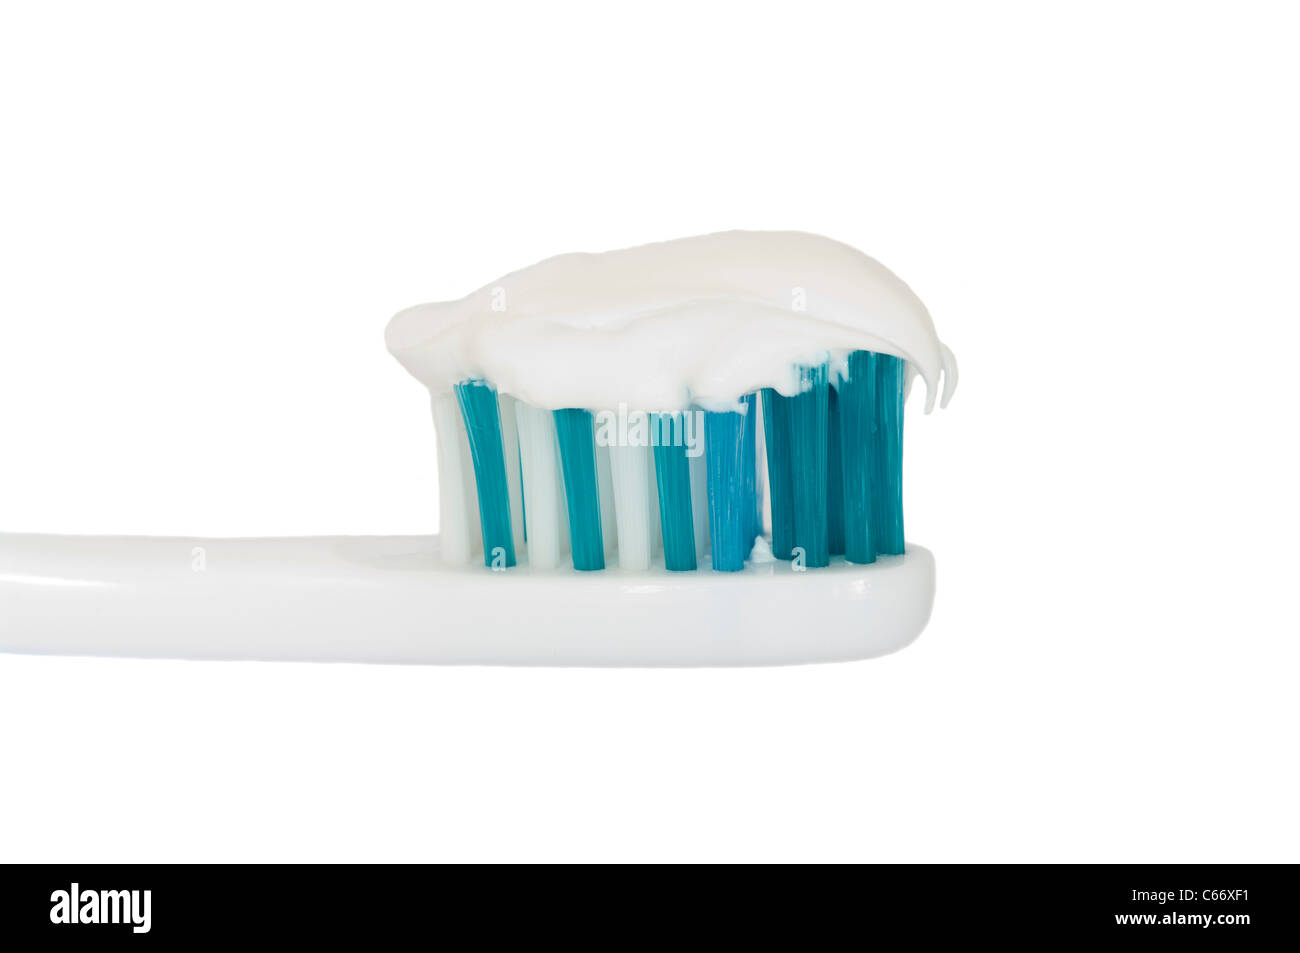 Toothpaste on a Toothbrush Stock Photo - Alamy